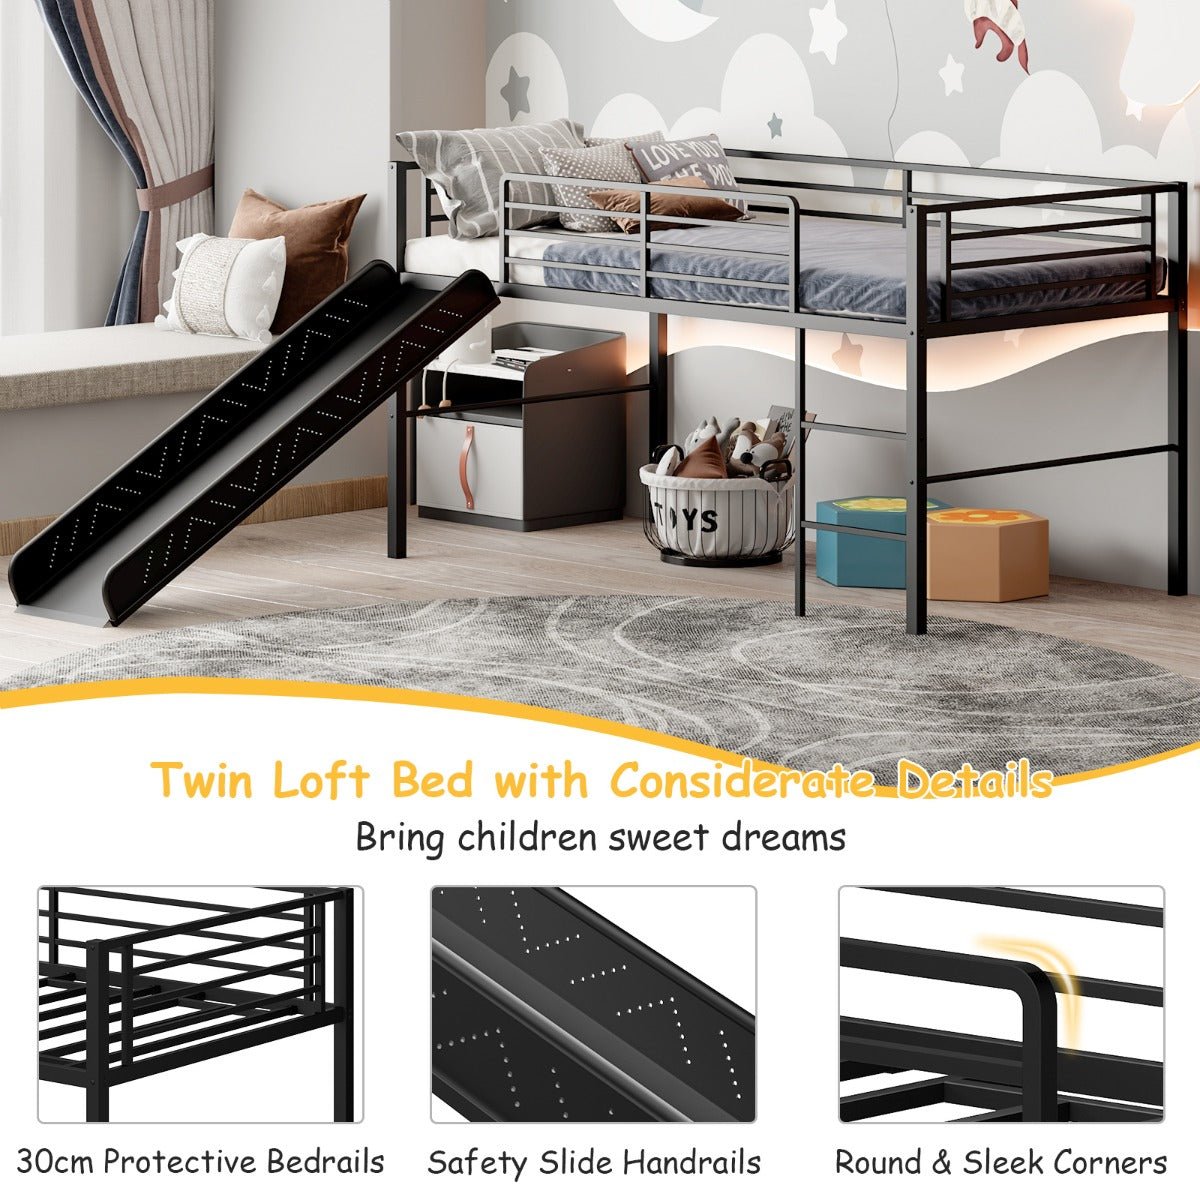 Enjoy the Thrills of Our Black Metal Loft Bed